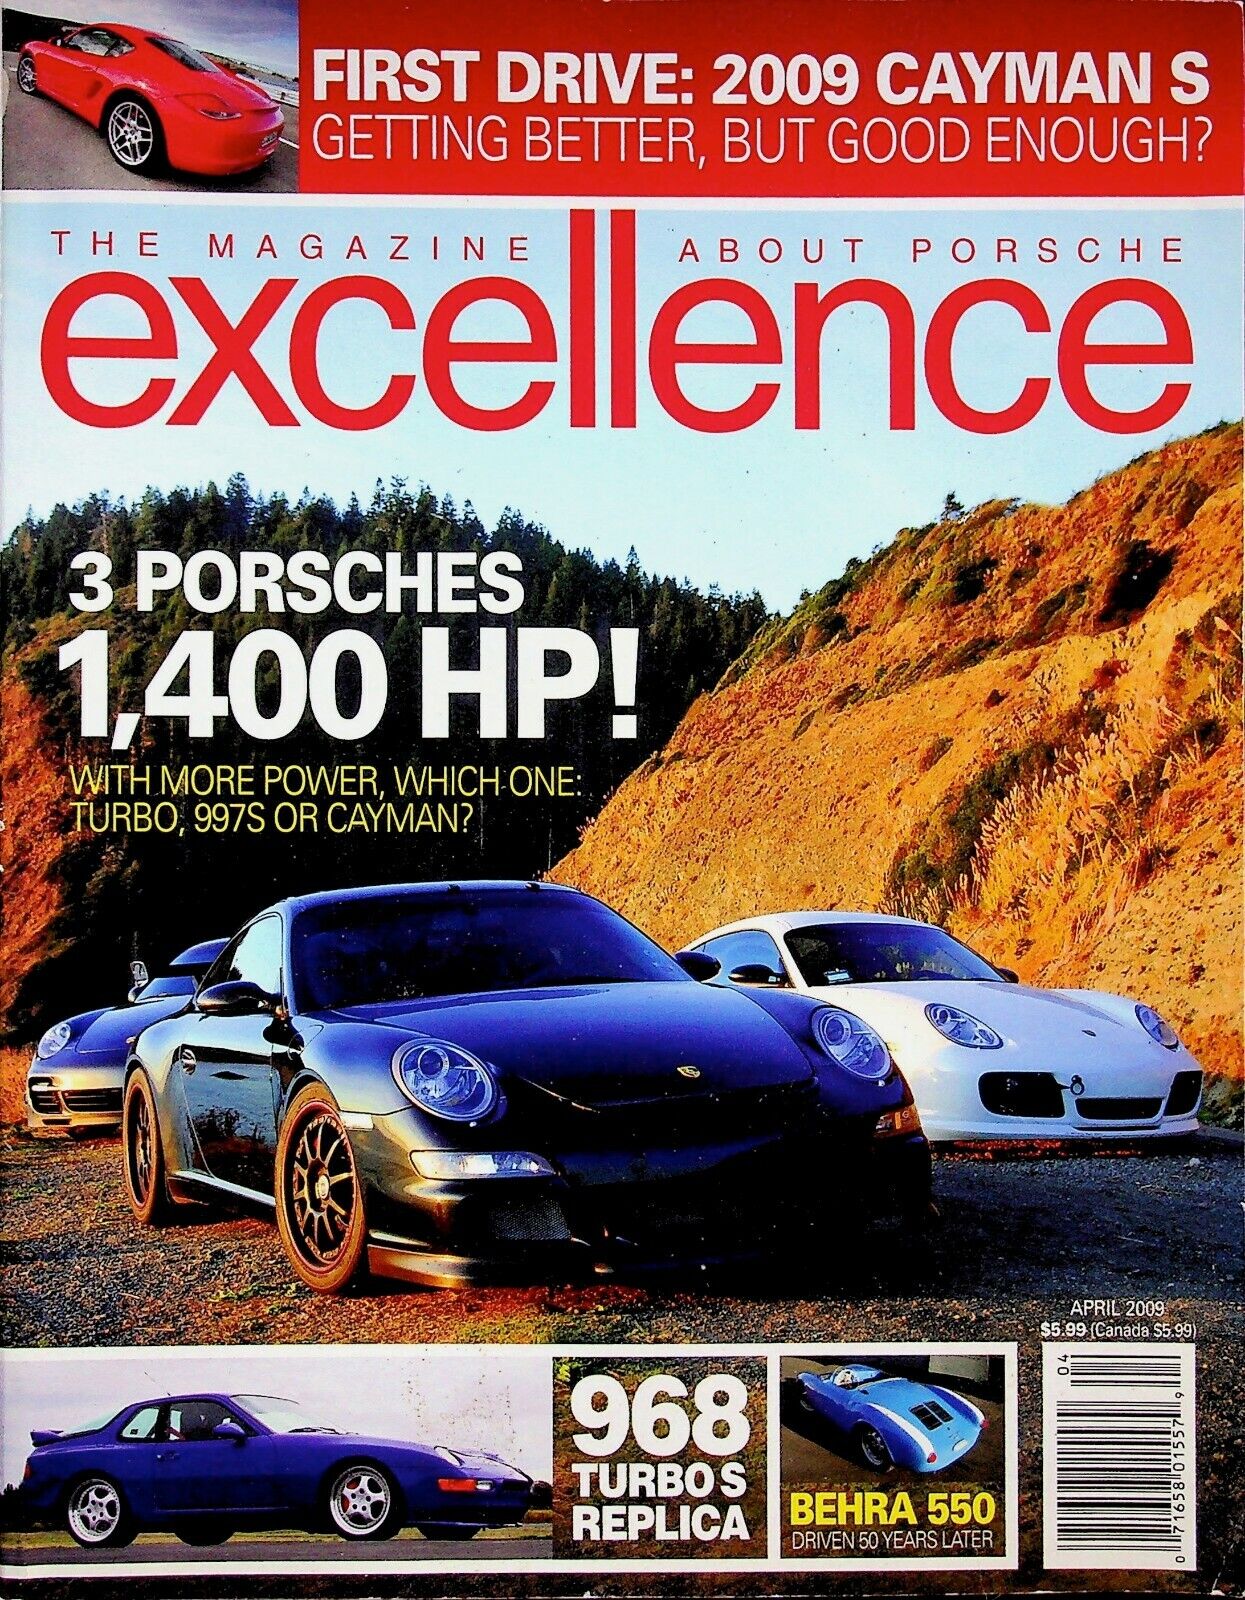 3 PORSCHES 1,400 HP - EXCELLENCE HOT ROD MAGAZINE NUMBER 172 APRIL 2009